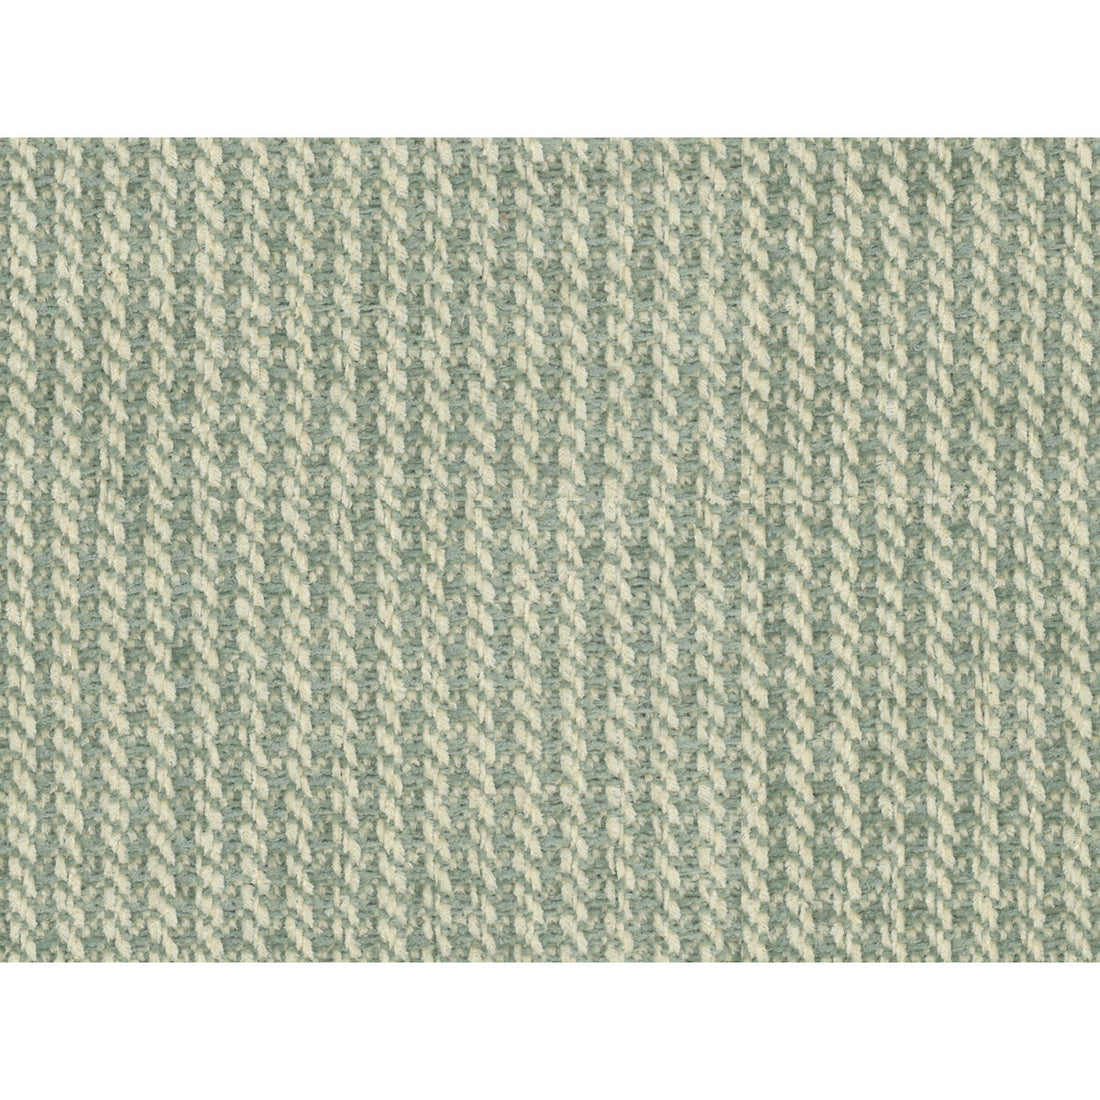 Granier Chenille fabric in seaglass color - pattern 8016105.113.0 - by Brunschwig &amp; Fils in the Chambery Textures collection